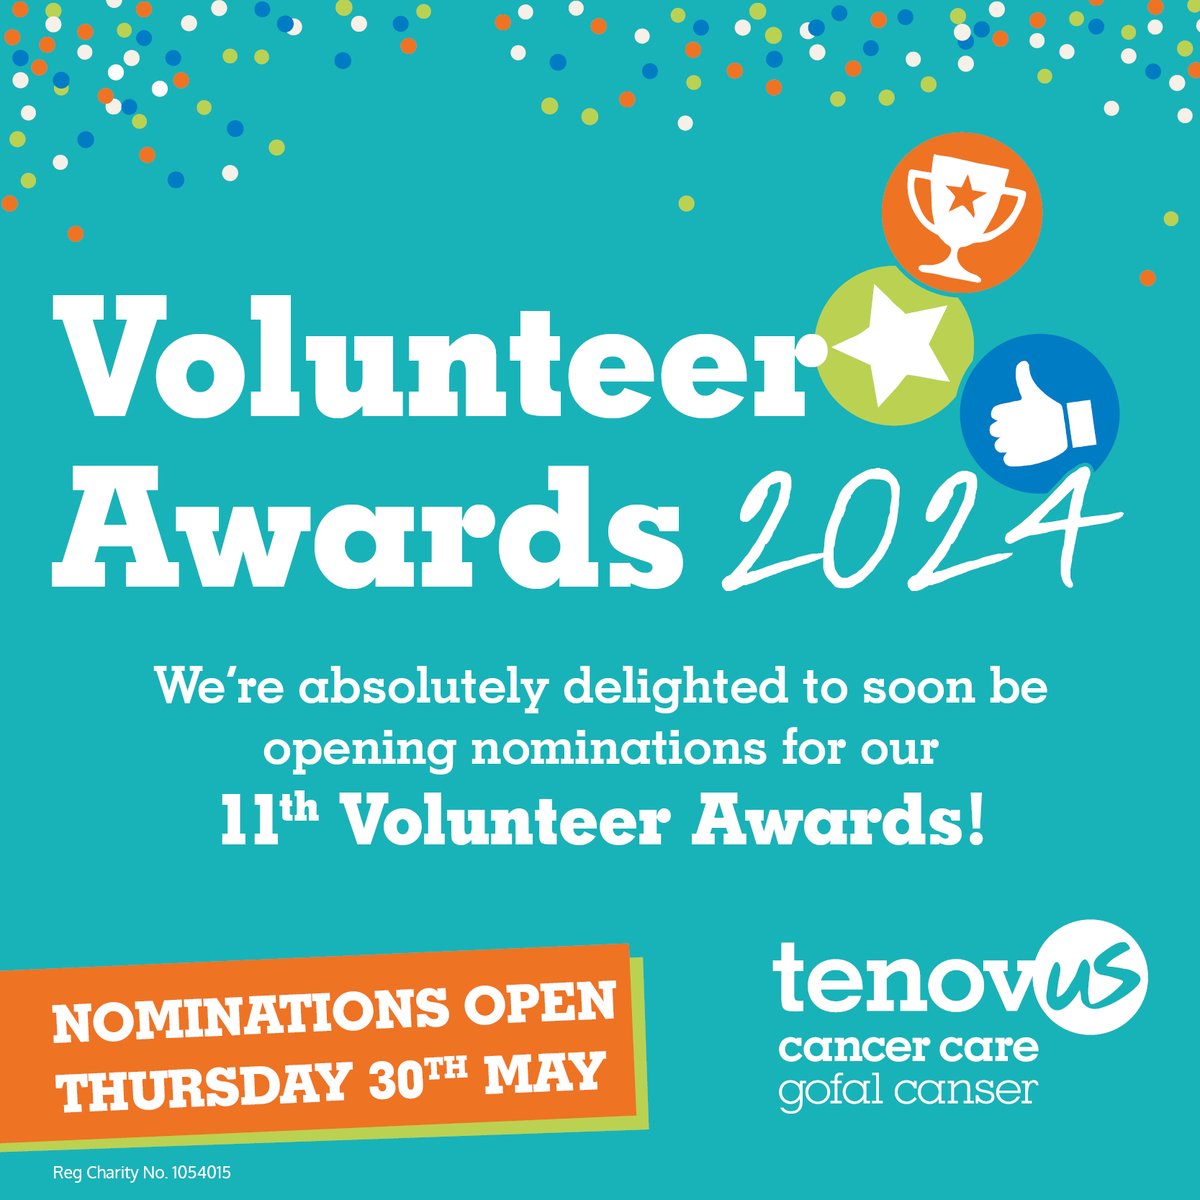 We're so excited, we can't keep it a secret any longer! Our Volunteer Awards will be back in September. Nominations open on 30 May, so keep your eyes peeled on our social media channels for more information. Want to volunteer for us? Click here➡️ tenovuscancercare.org.uk/about-us/volun…